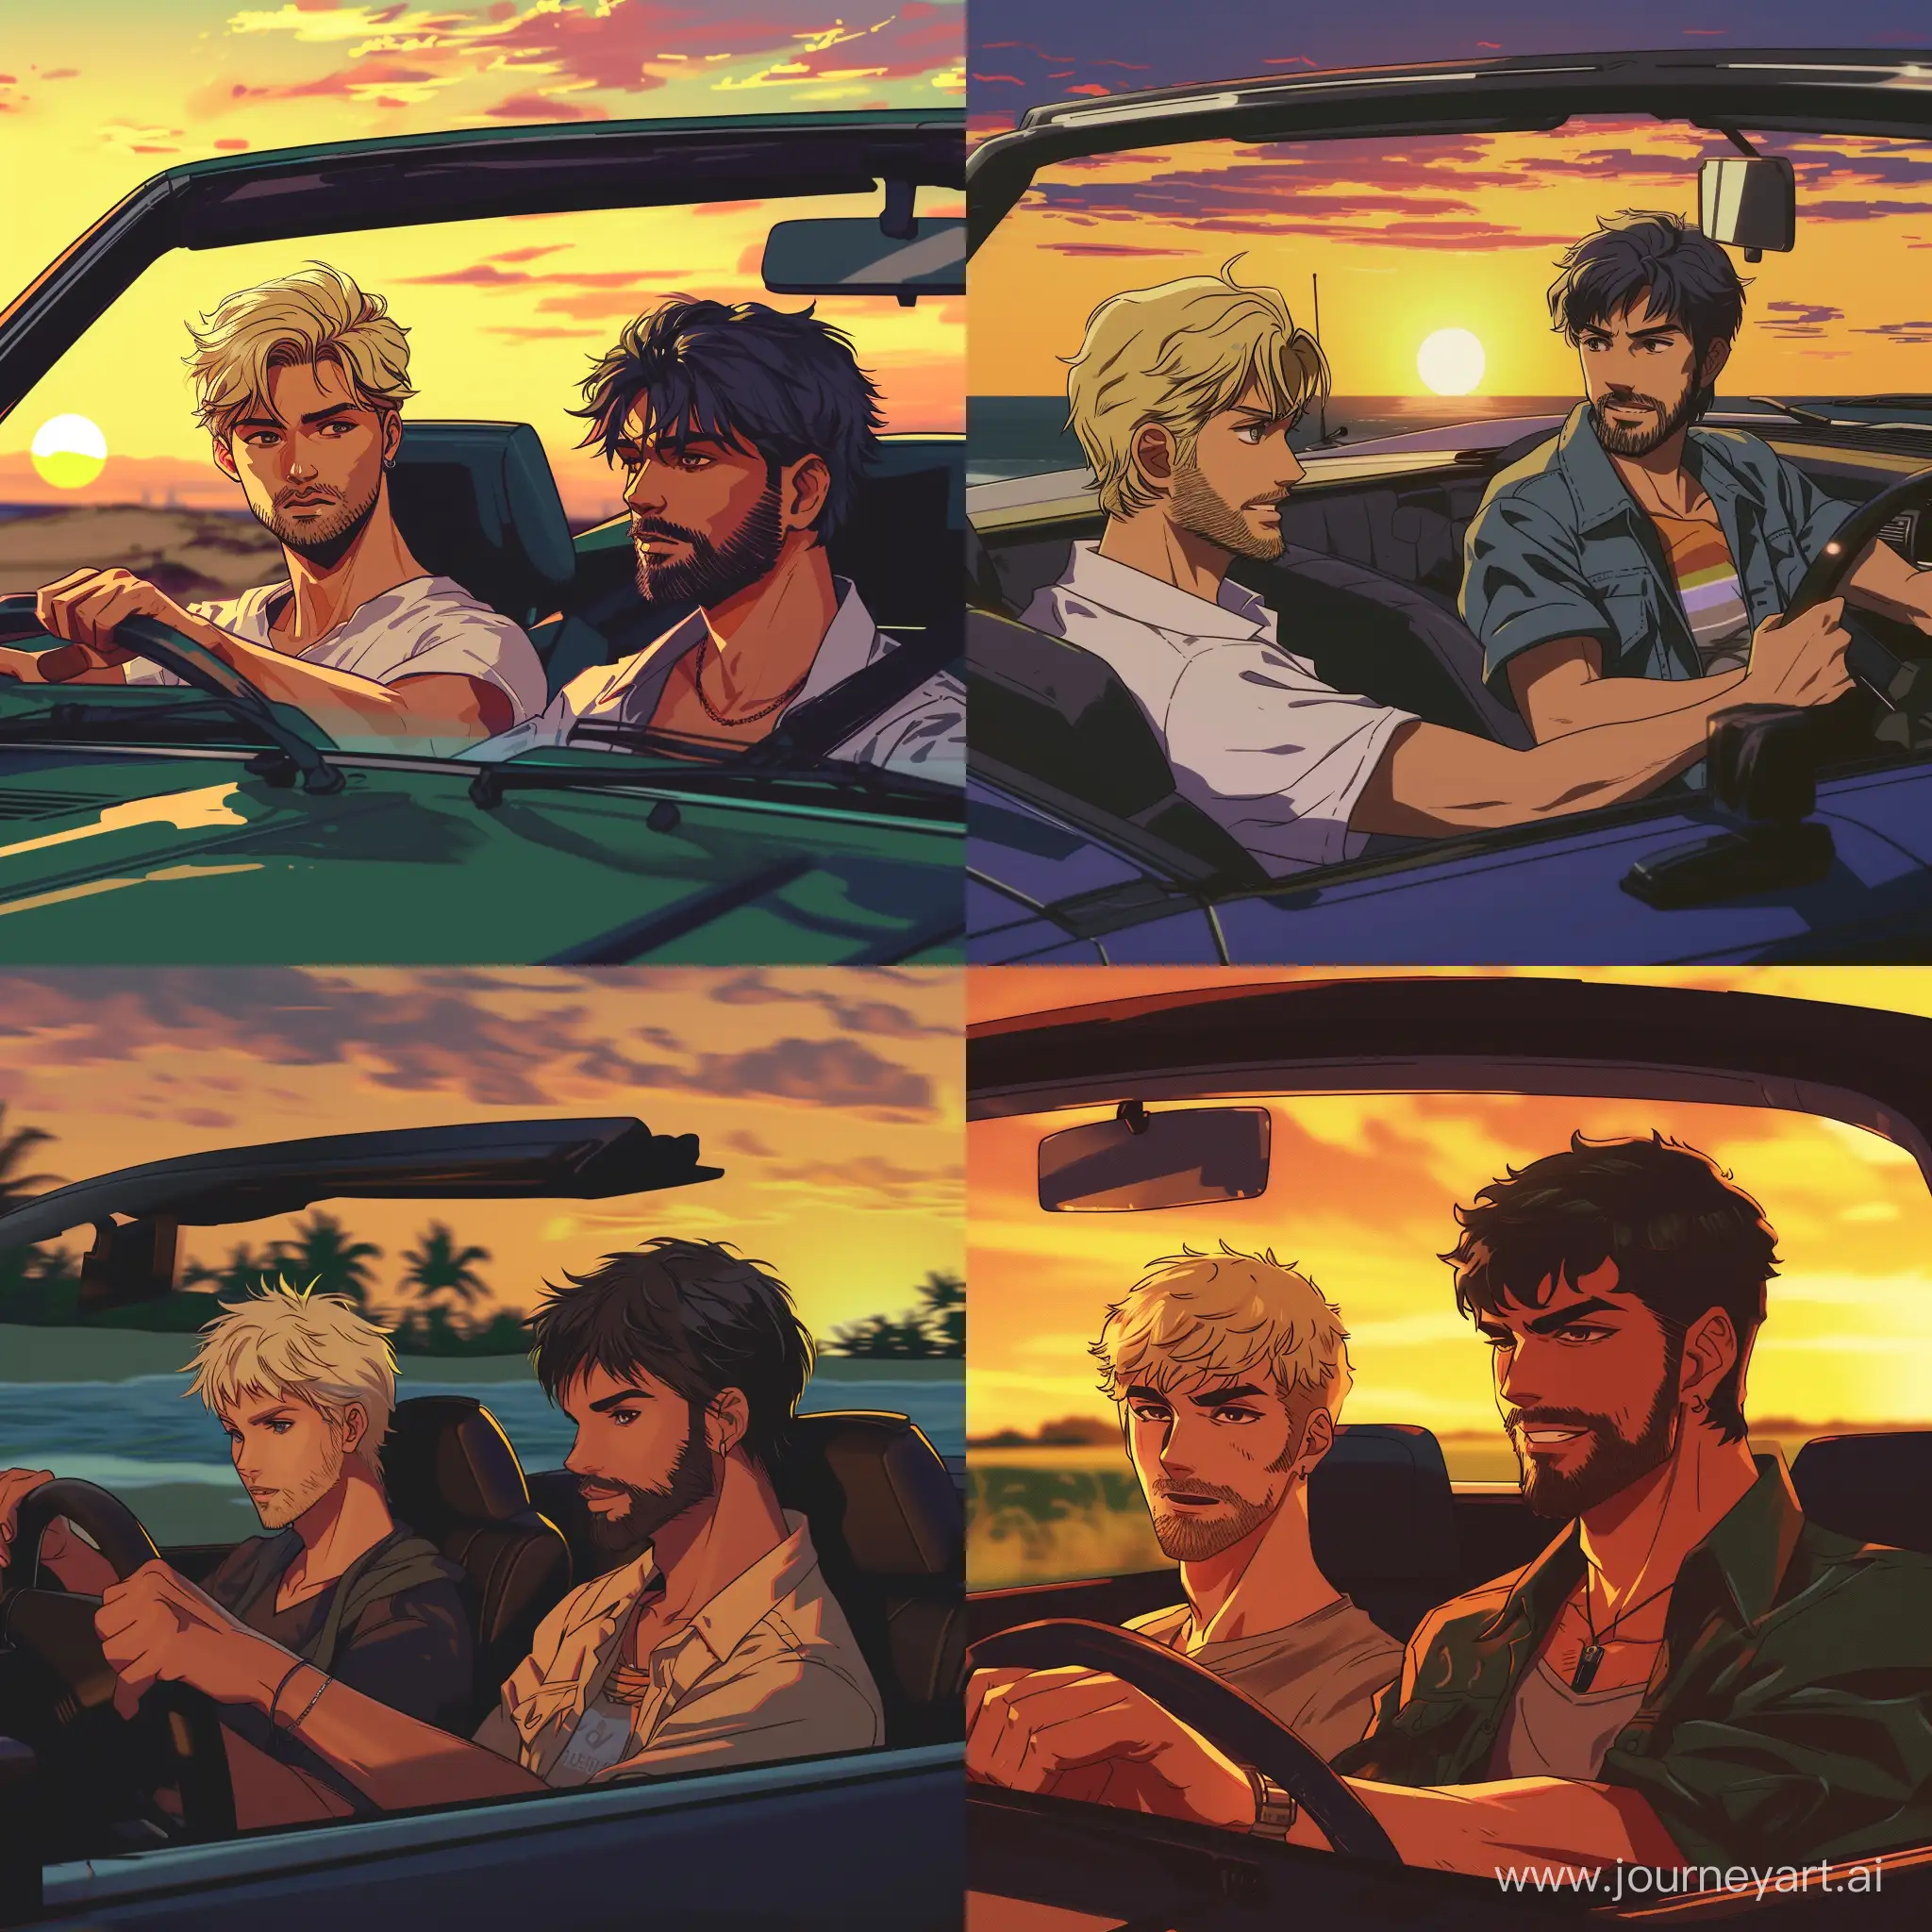 Two-Stylish-Friends-Enjoying-a-Sunset-Drive-in-Retro-80s-Anime-Style